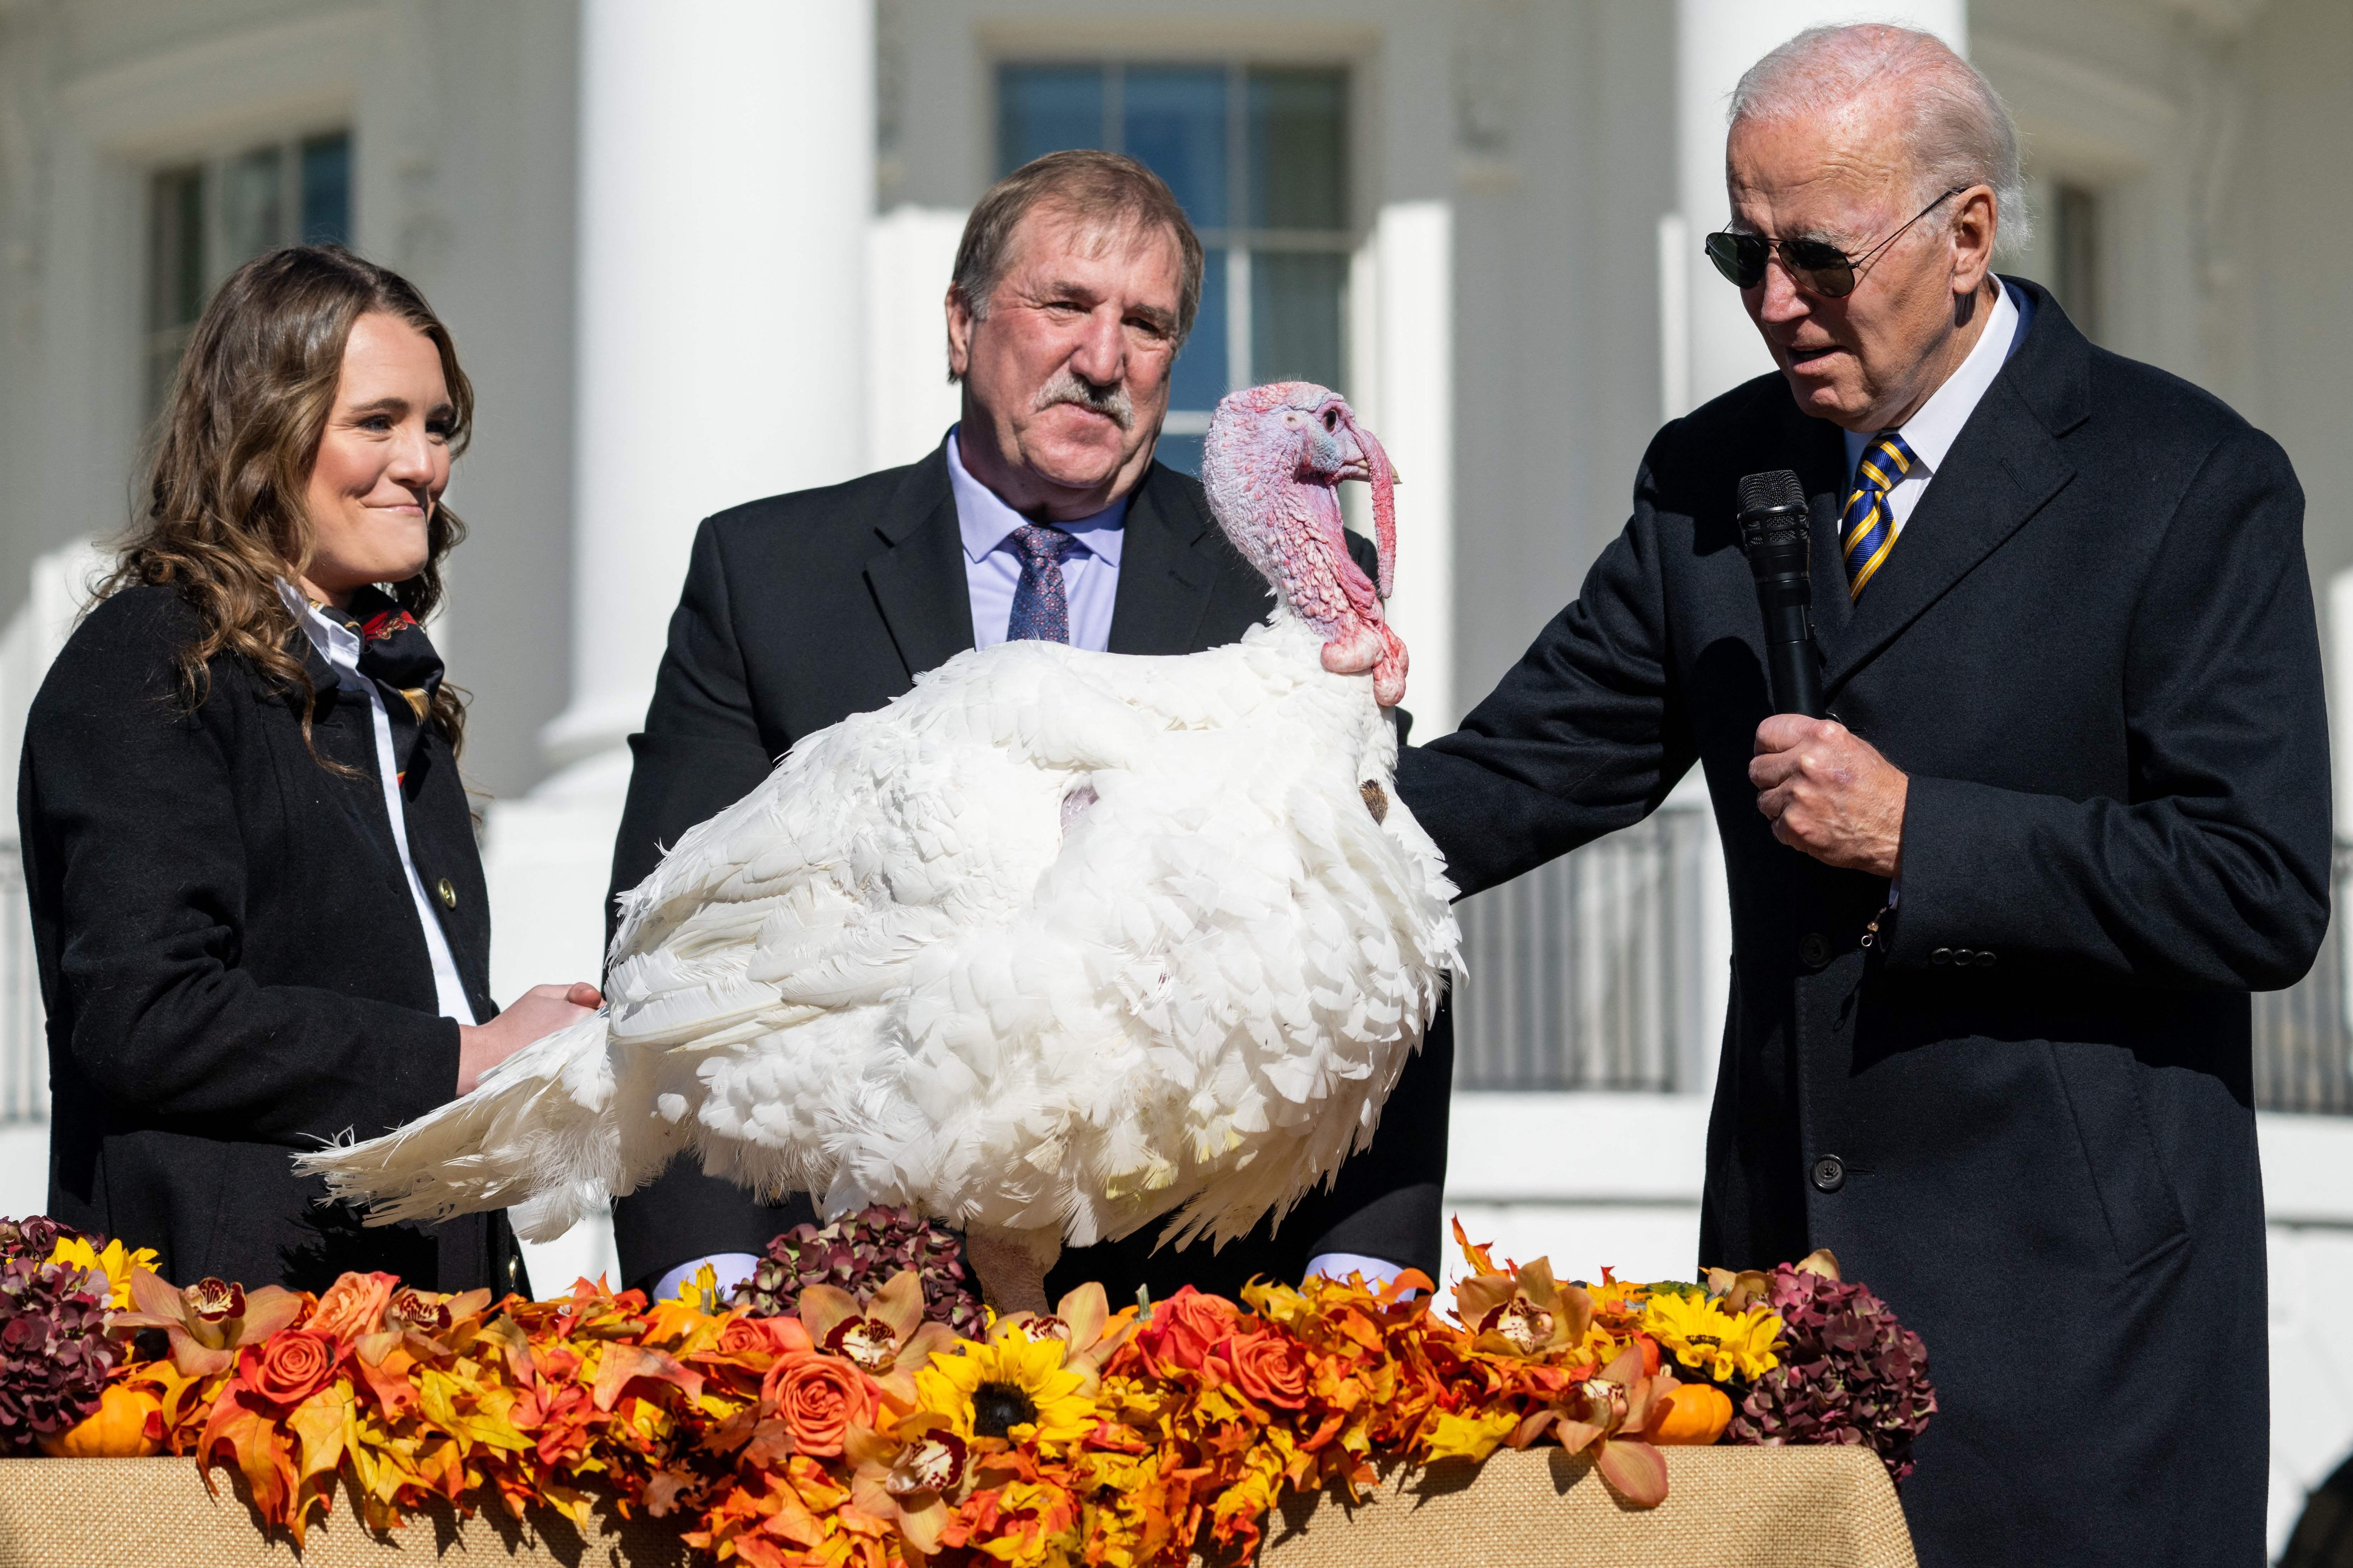 US President Joe Biden pardons Chocolate, the National Thanksgiving Turkey, as he is joined by the National Turkey Federation Chairman Ronnie Parker (C) and Alexa Starnes, Daughter of the Owner of Circle S Ranch on the South Lawn of the White House in Washington, DC on November 21, 2022. (Photo by SAUL LOEB / AFP) (Photo by SAUL LOEB/AFP via Getty Images)